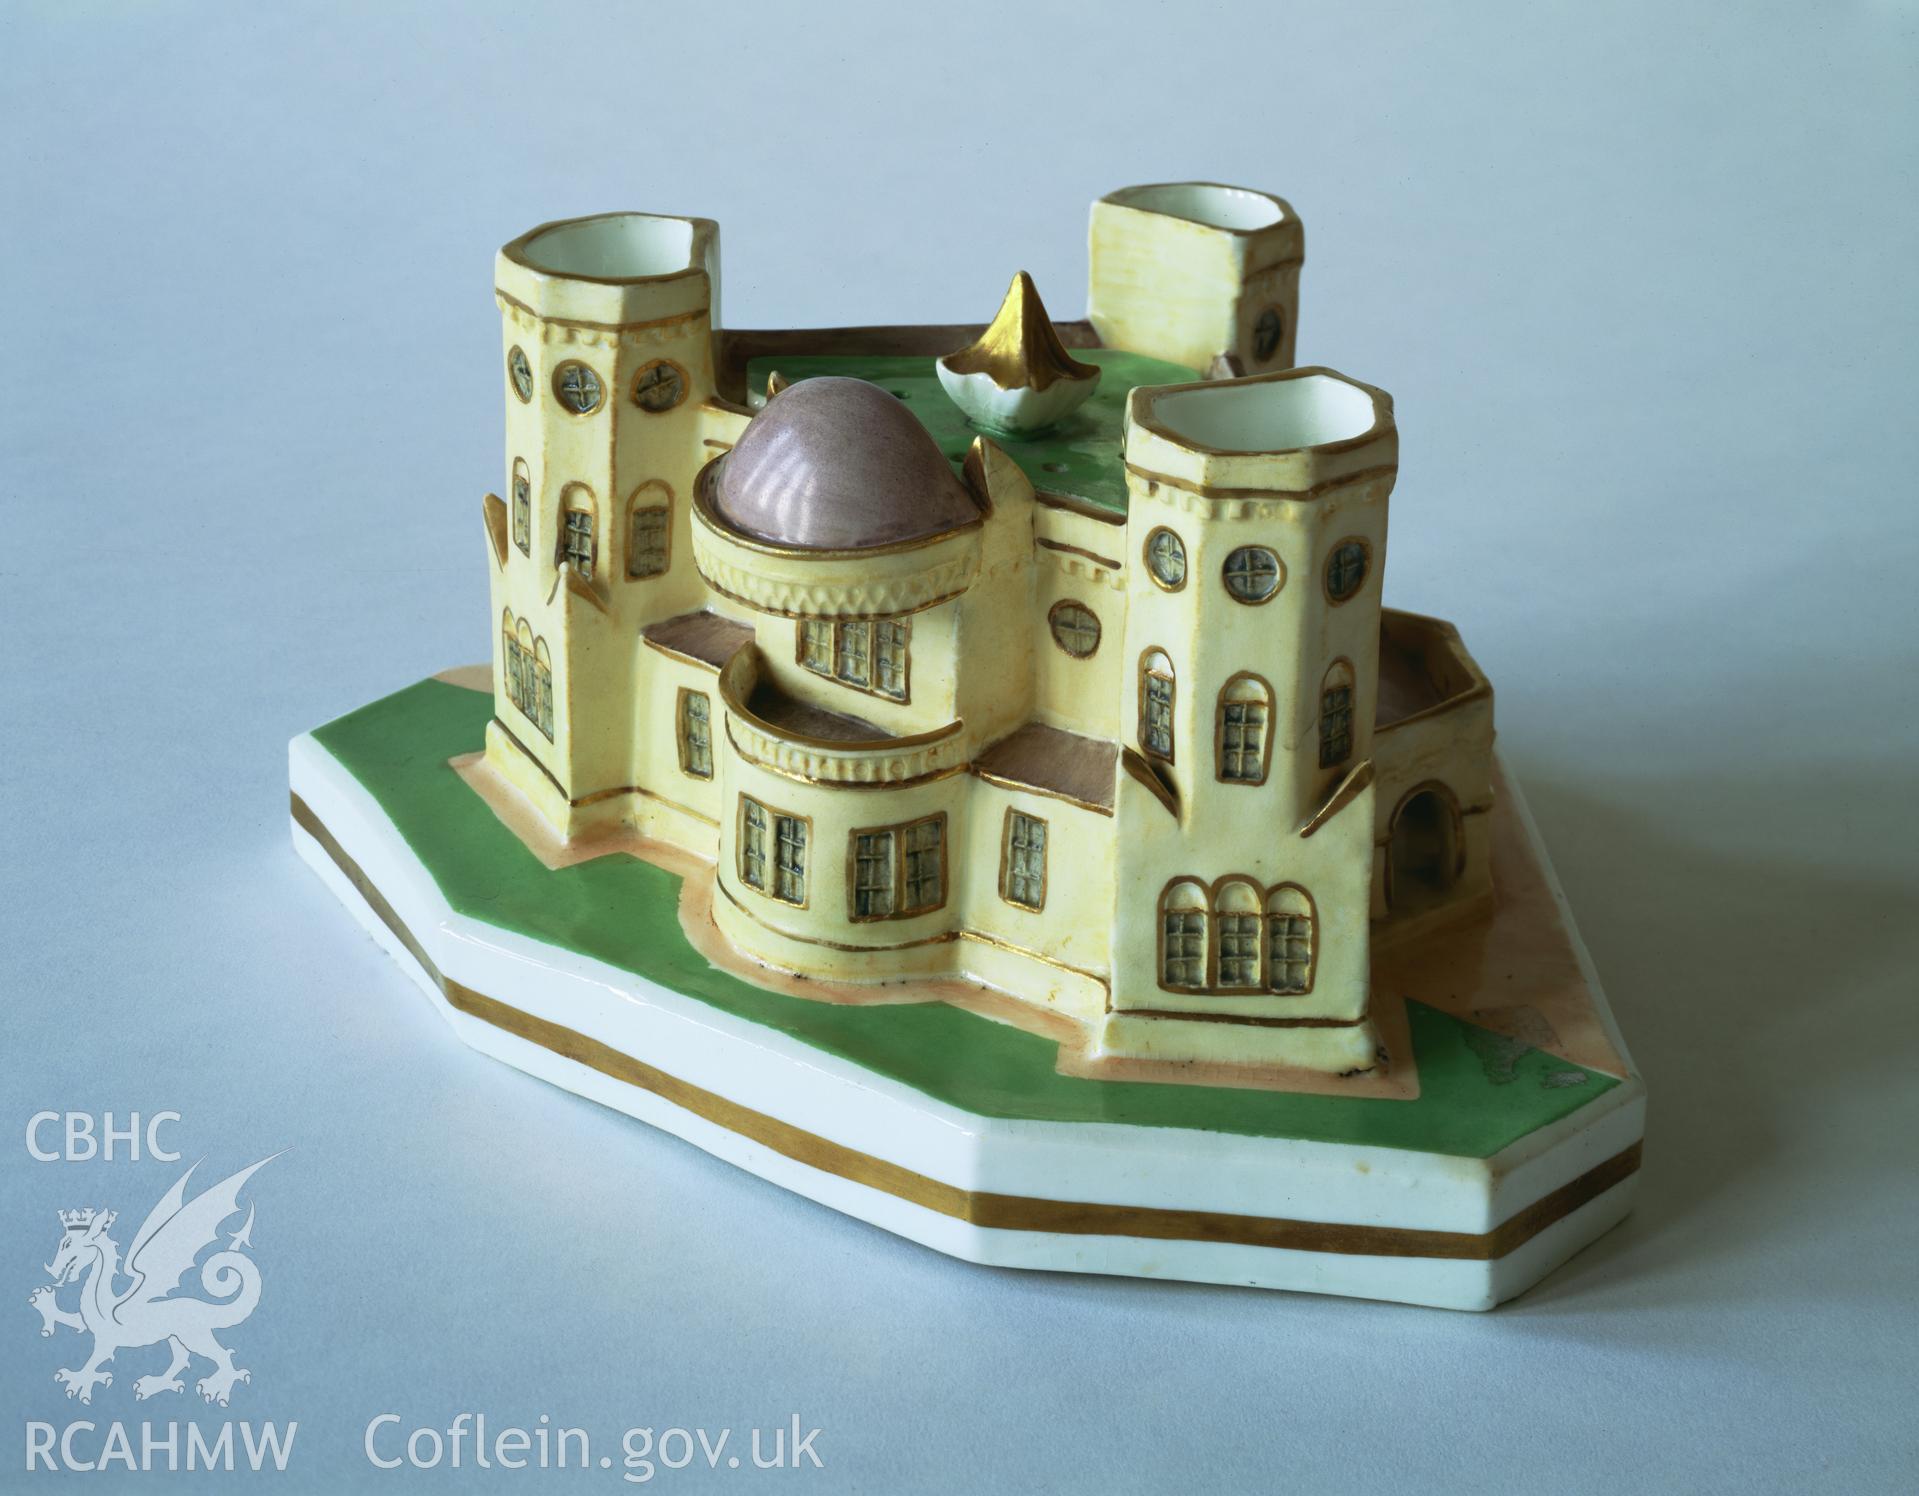 RCAHMW colour transparency showing china model of Castle House, King Street, Aberystwyth